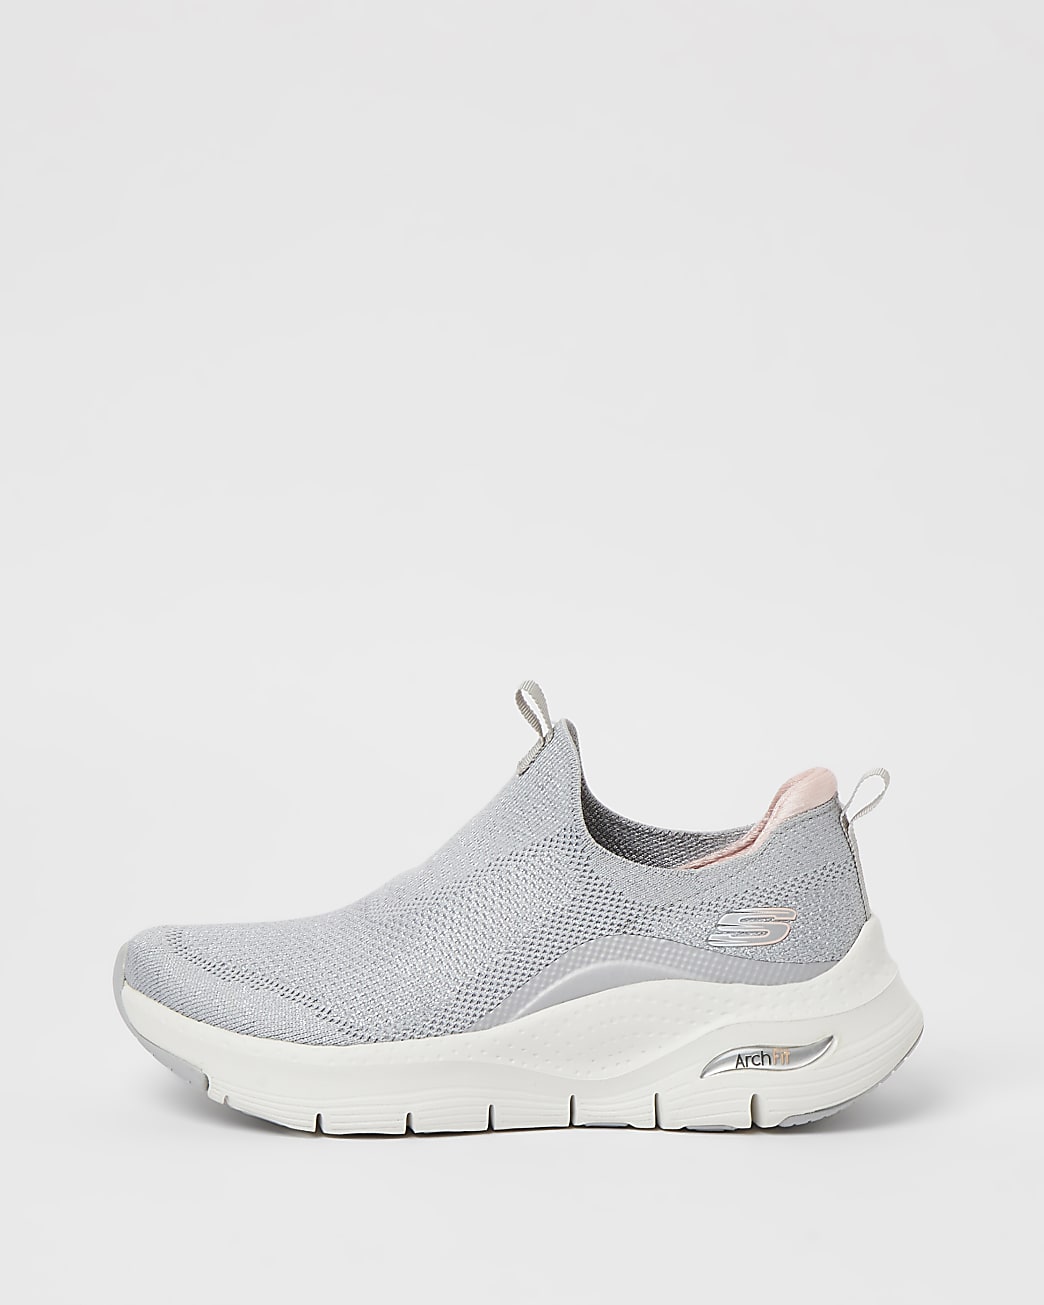 Skechers grey Arch Fit trainers